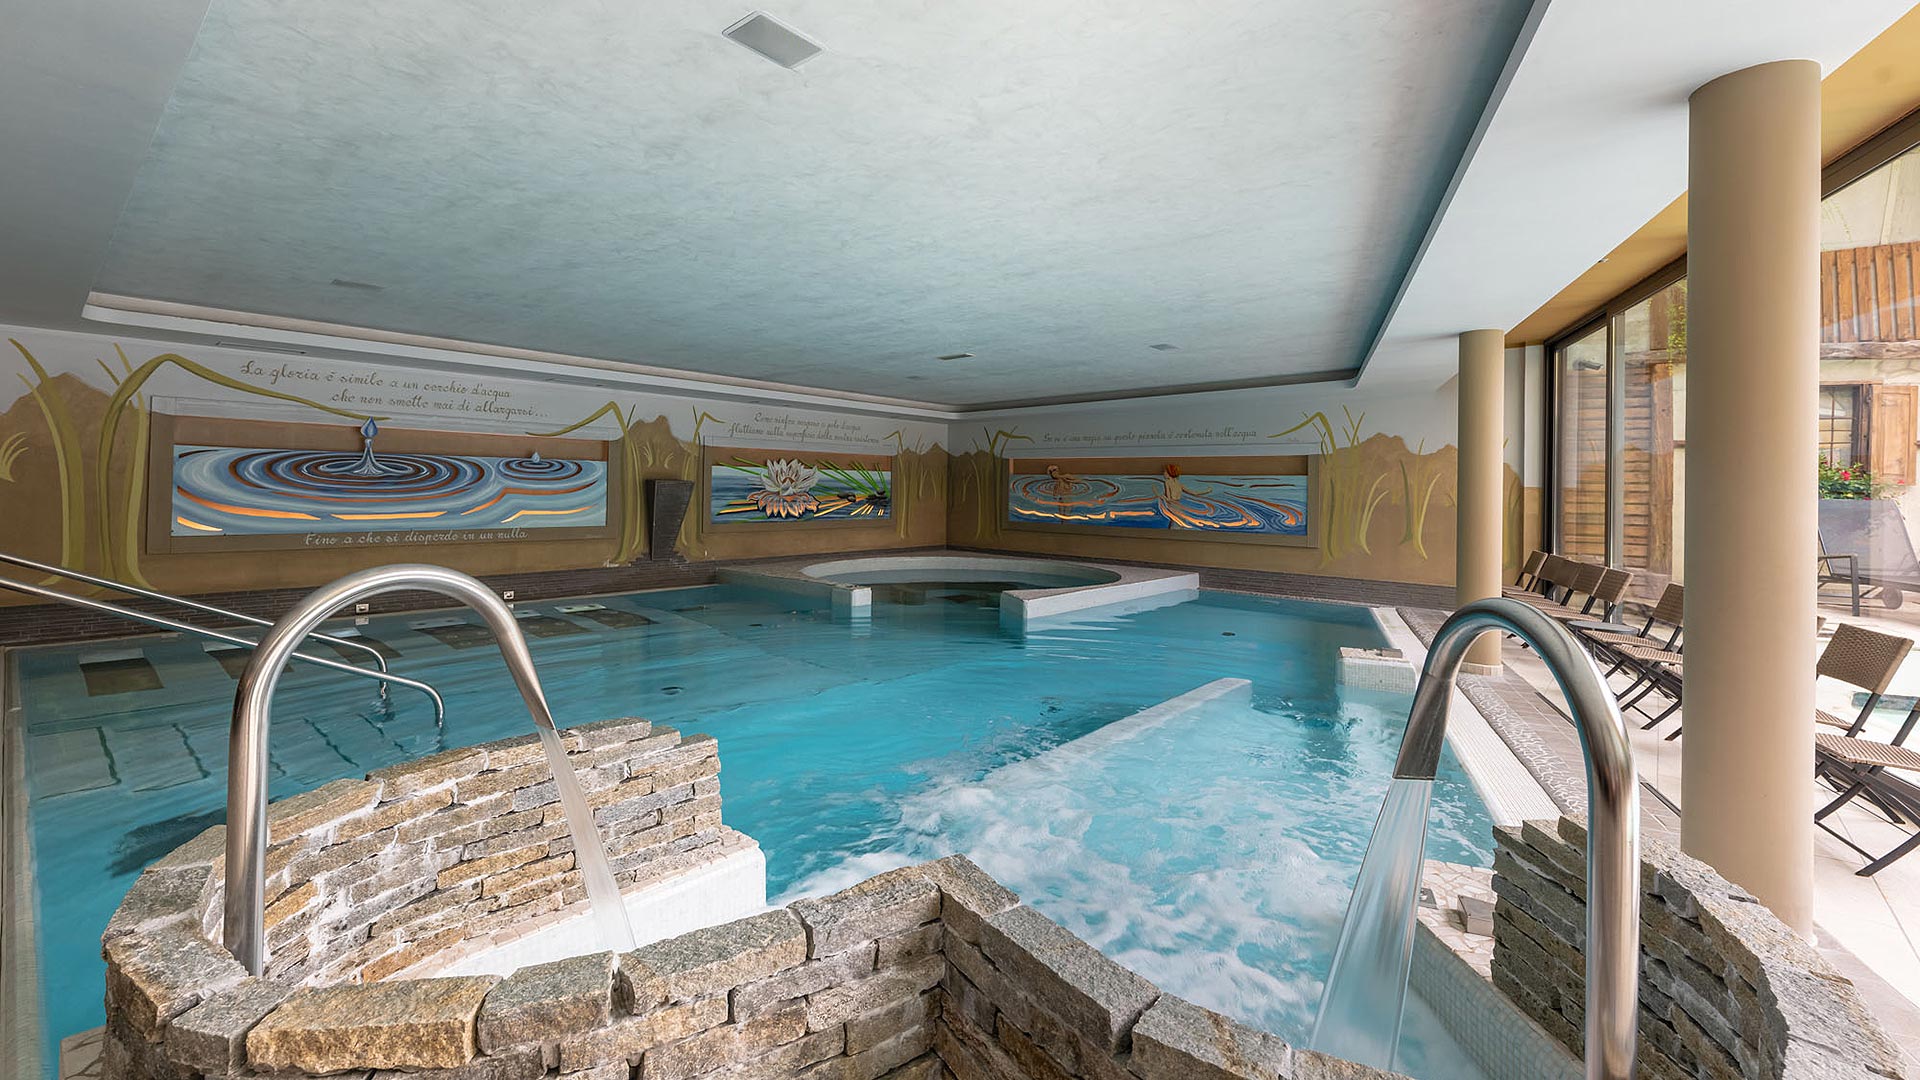 The Family Hotel with SPA in Trentino has a large indoor heated swimming pool, hydromassage paths and other relaxing features.